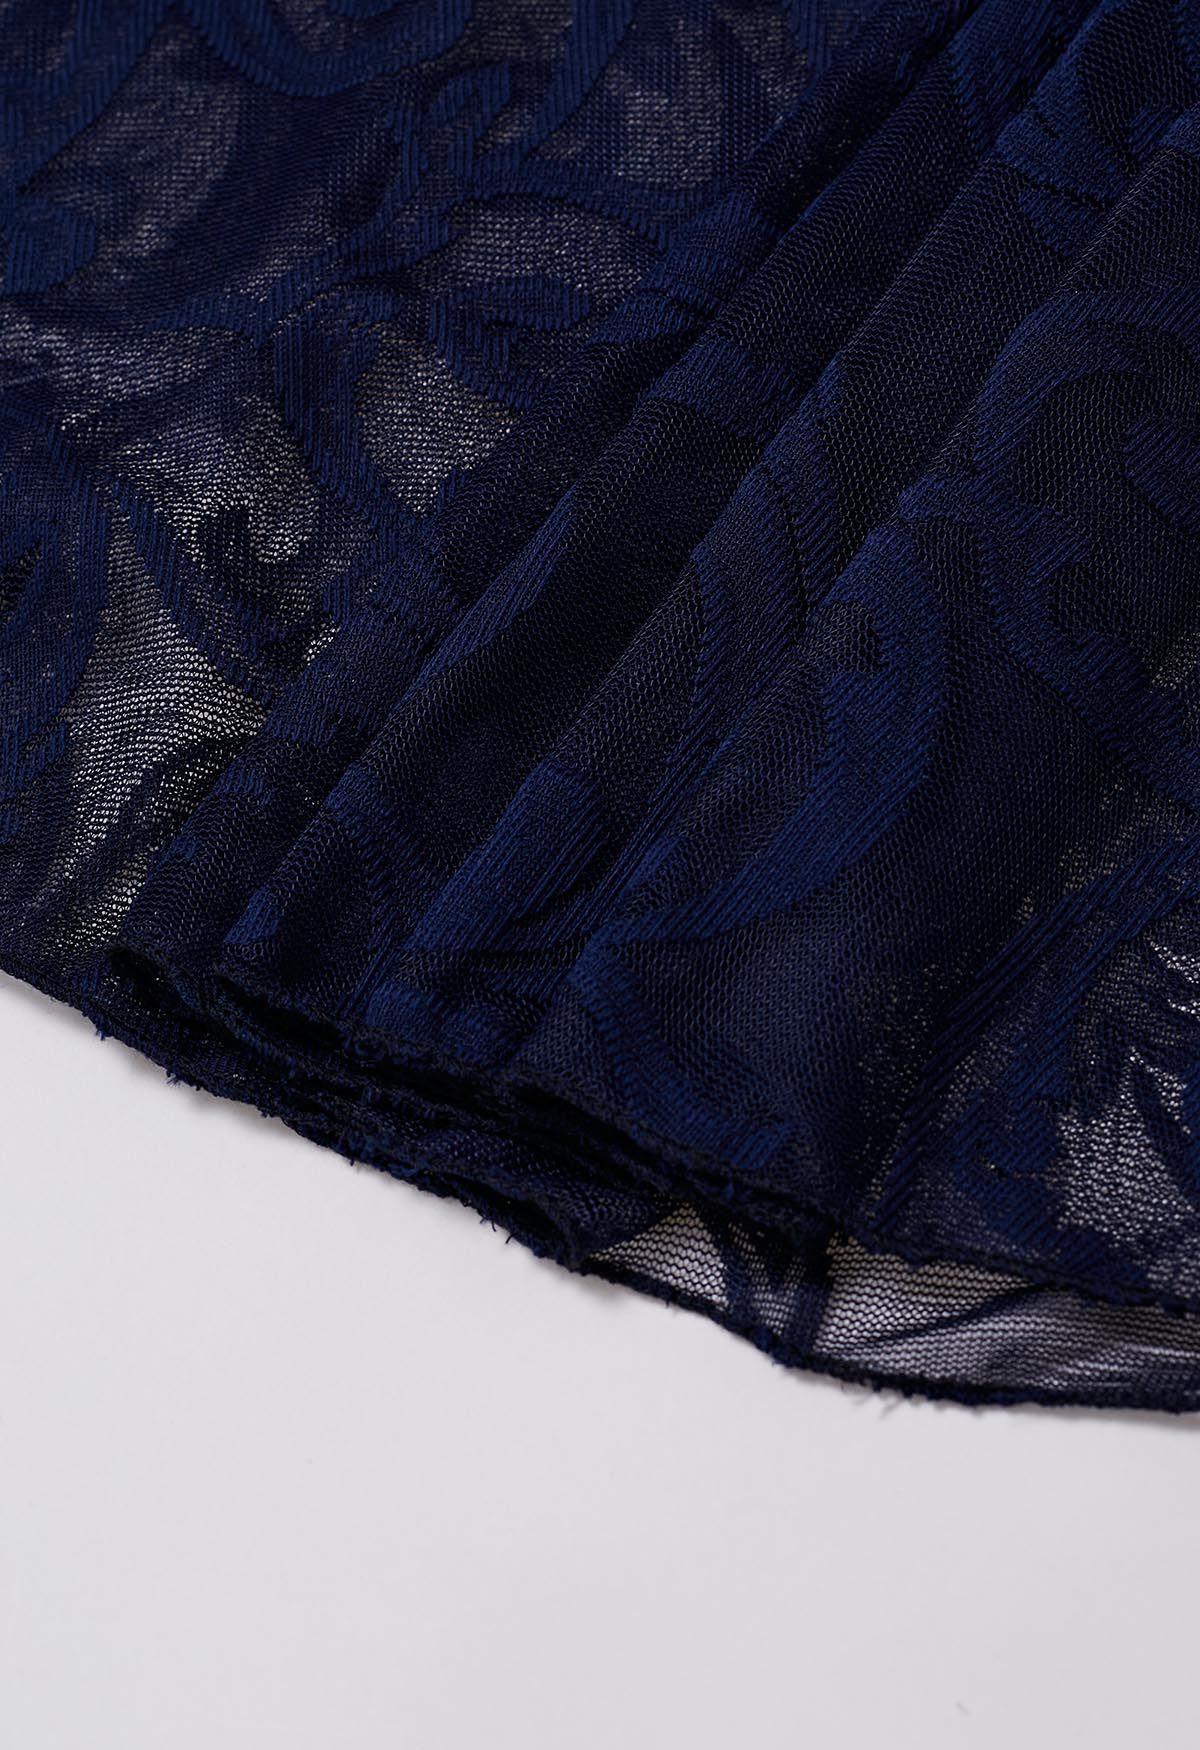 Sophisticated Floral Mesh Tulle Midi Skirt in Navy